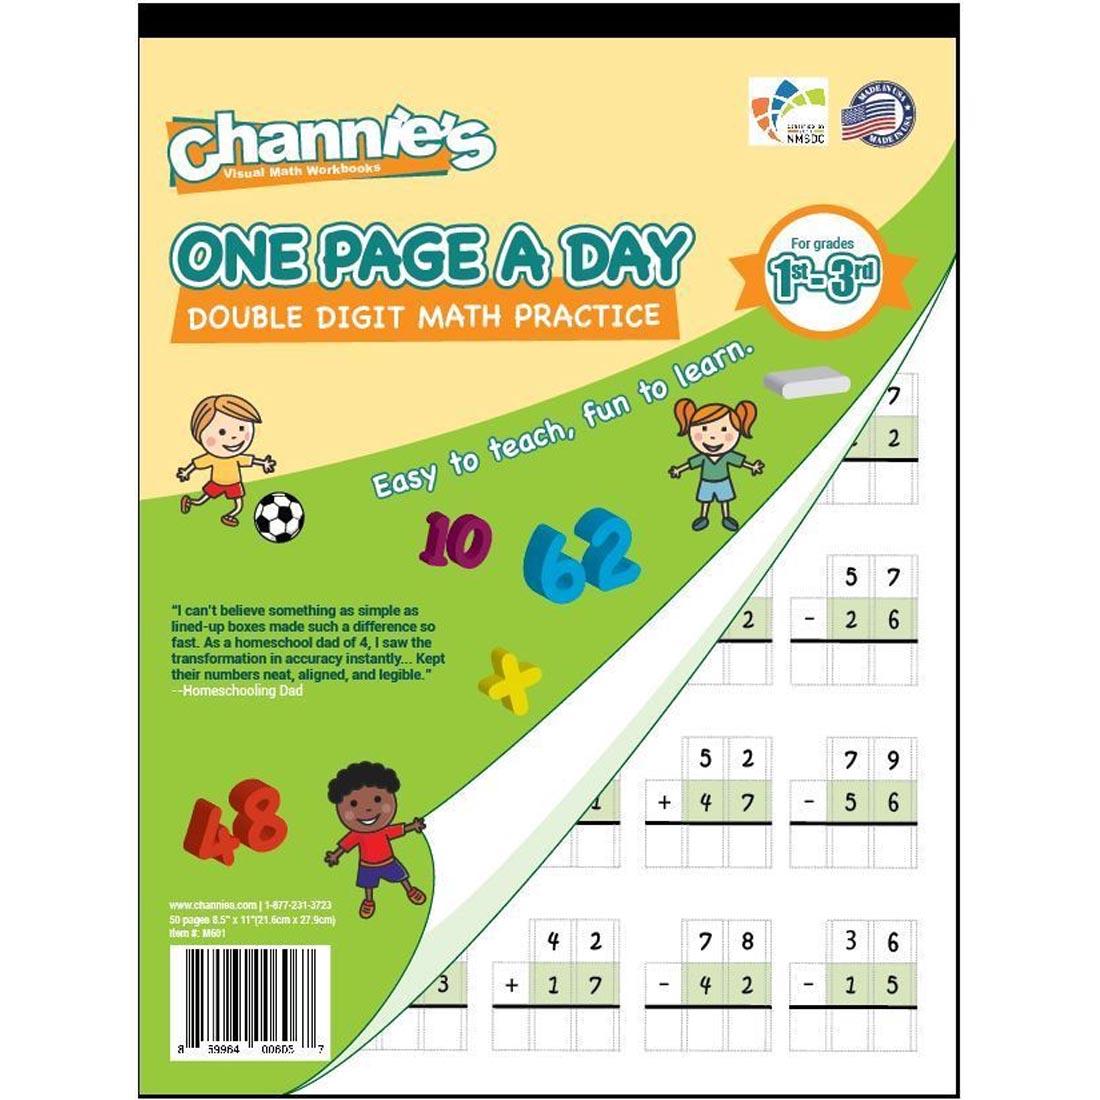 Channie's Visual Math Workbook: One Page a Day Double Digit Math Practice